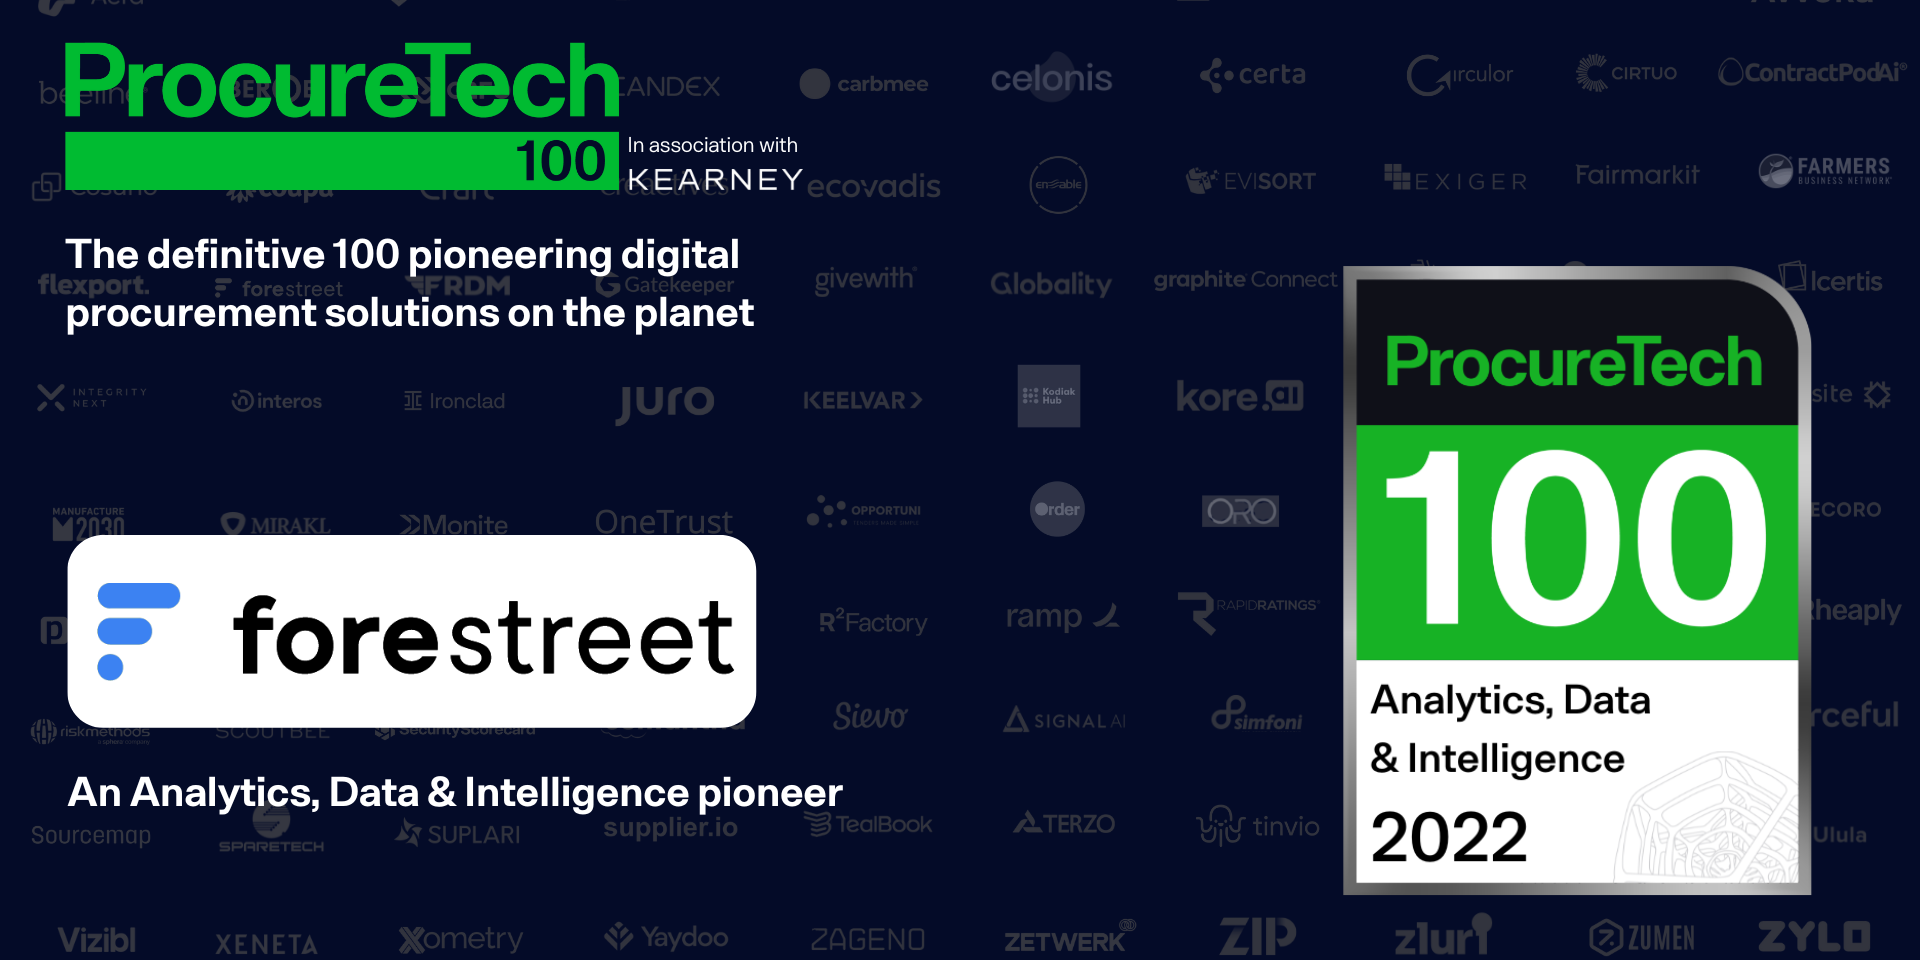 Forestreet has been selected for the 2022 ProcureTech100